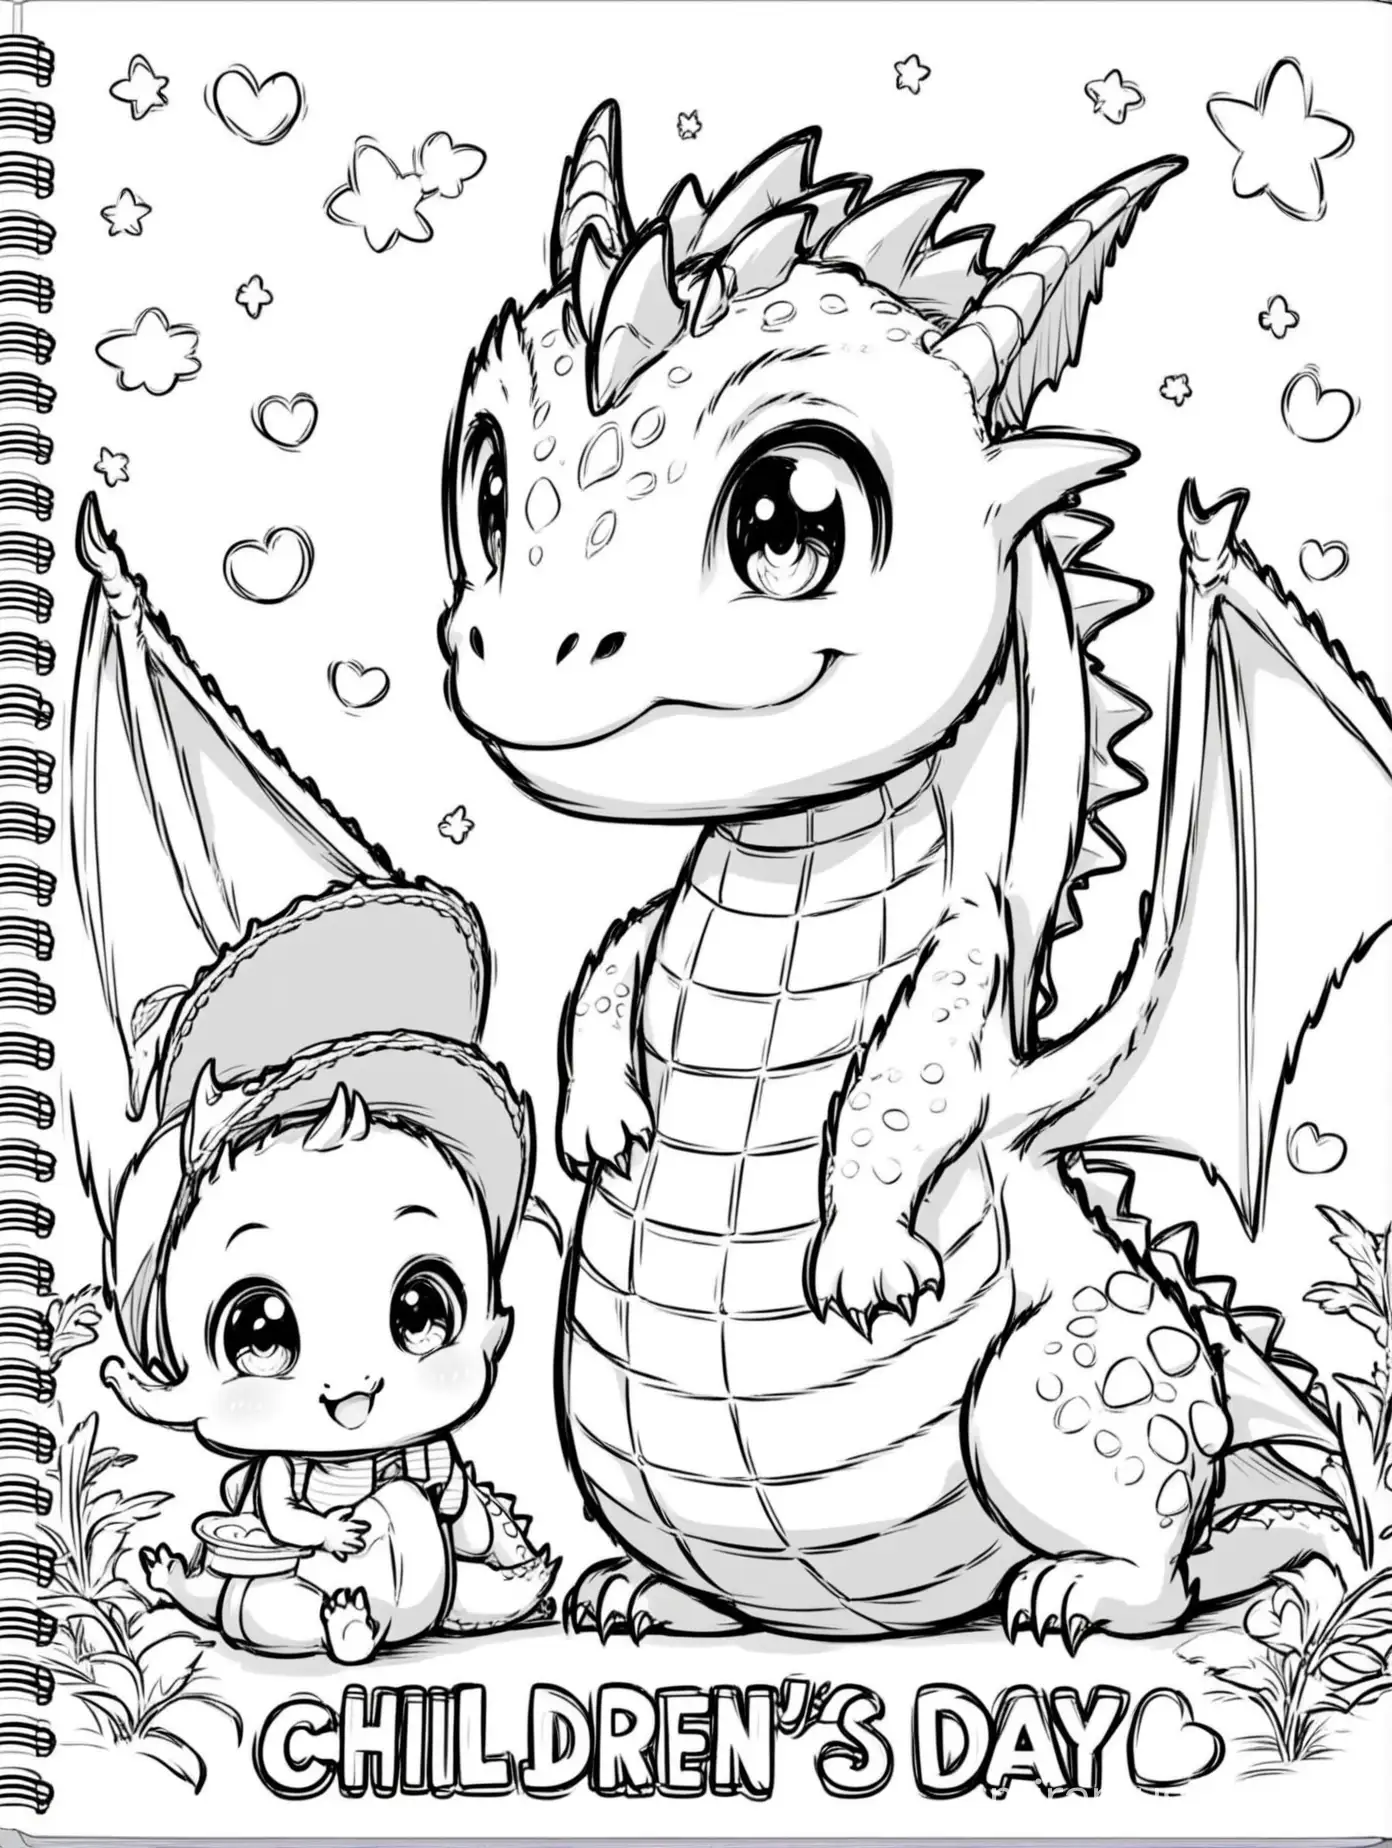 children's coloring book of cute baby dragon and its father, Father's Day theme, only black and white